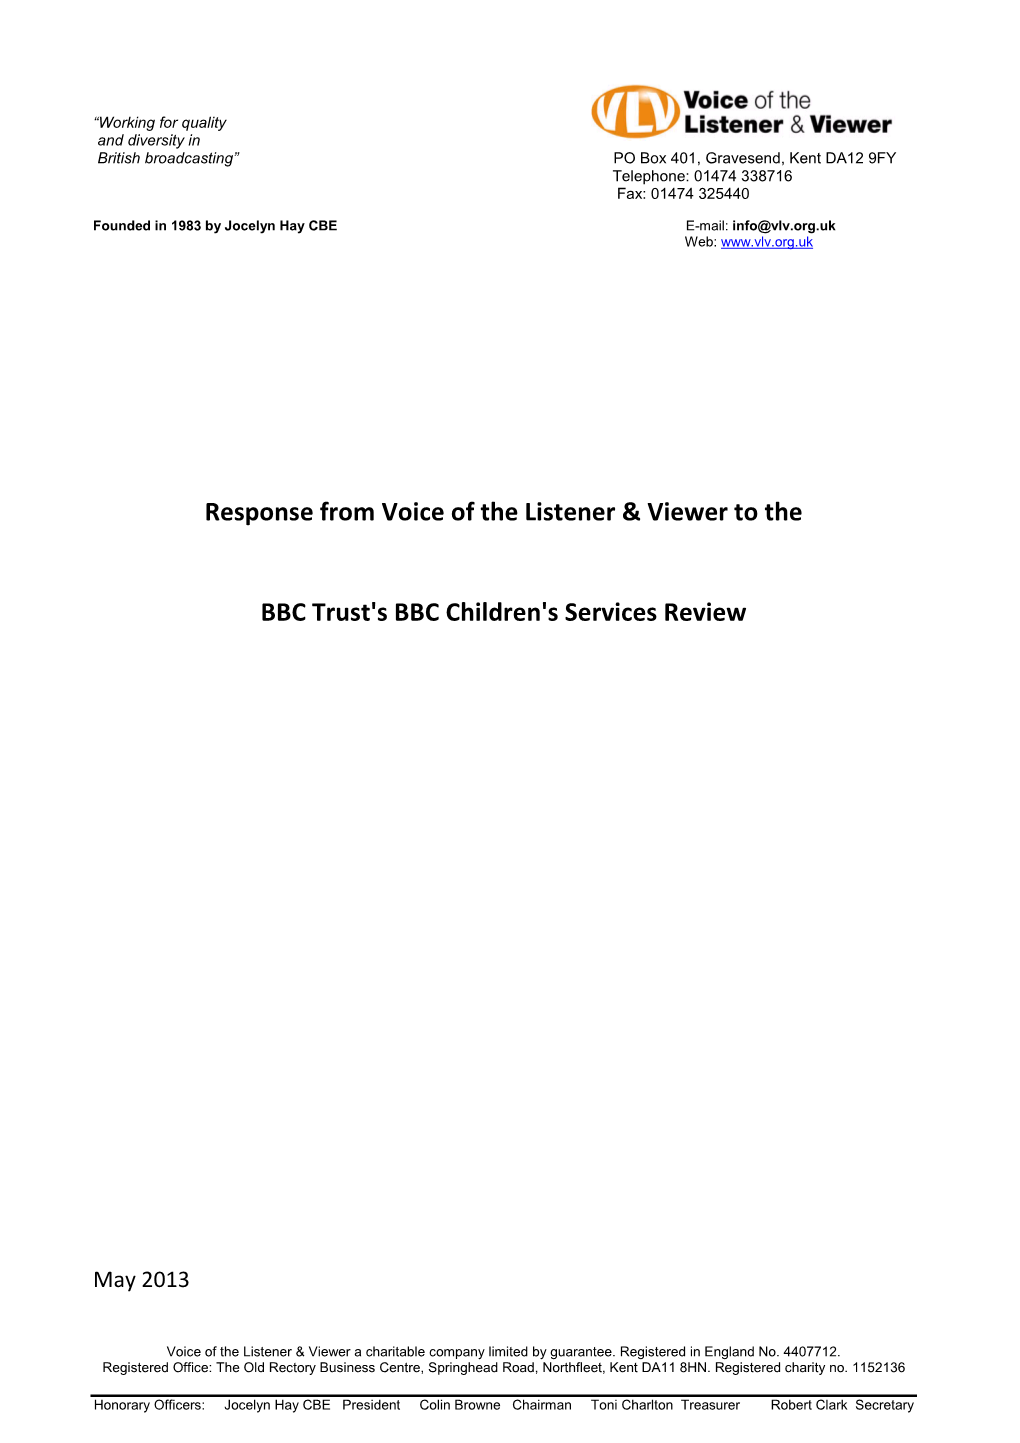 VLV Response to BBC Trust Review of Children's Services and Content